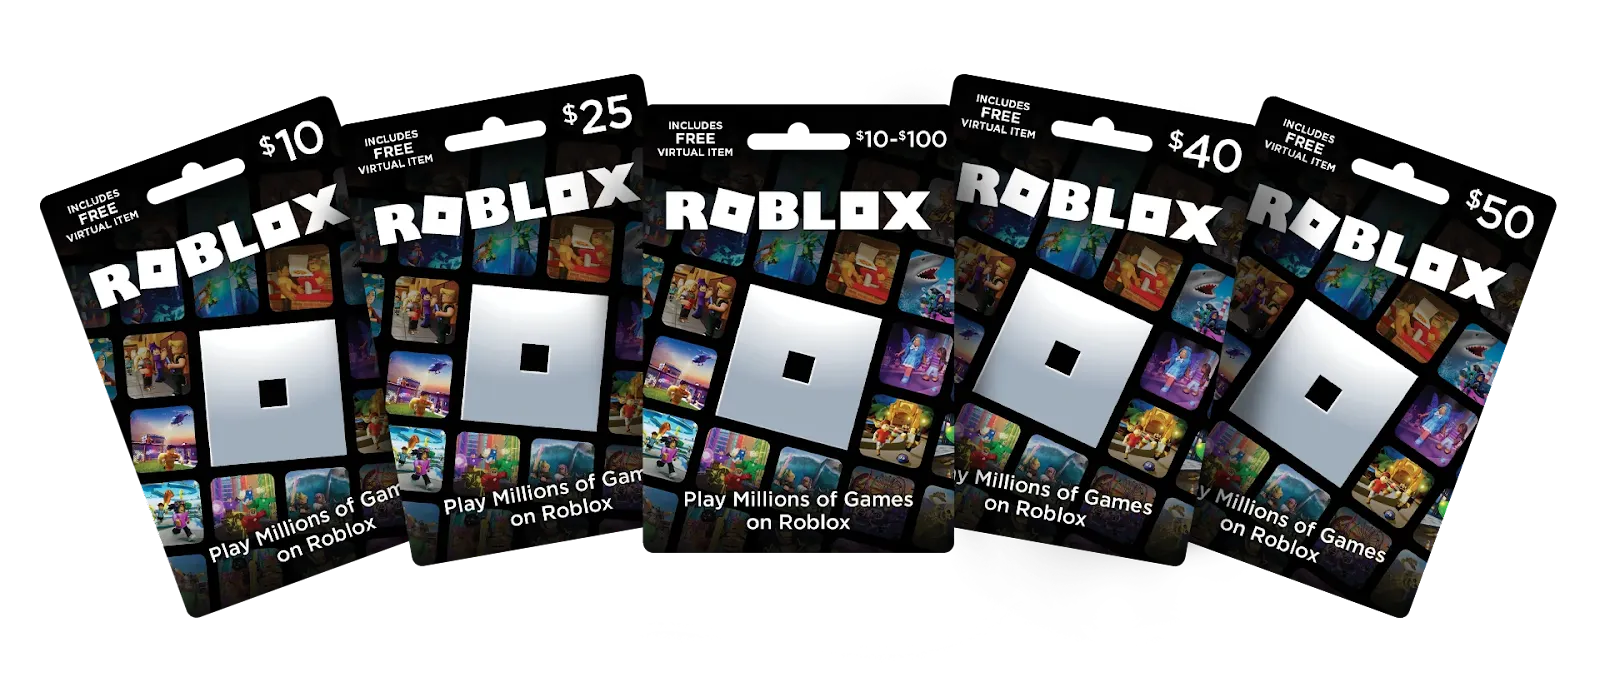 This is how much Robux cost actually.